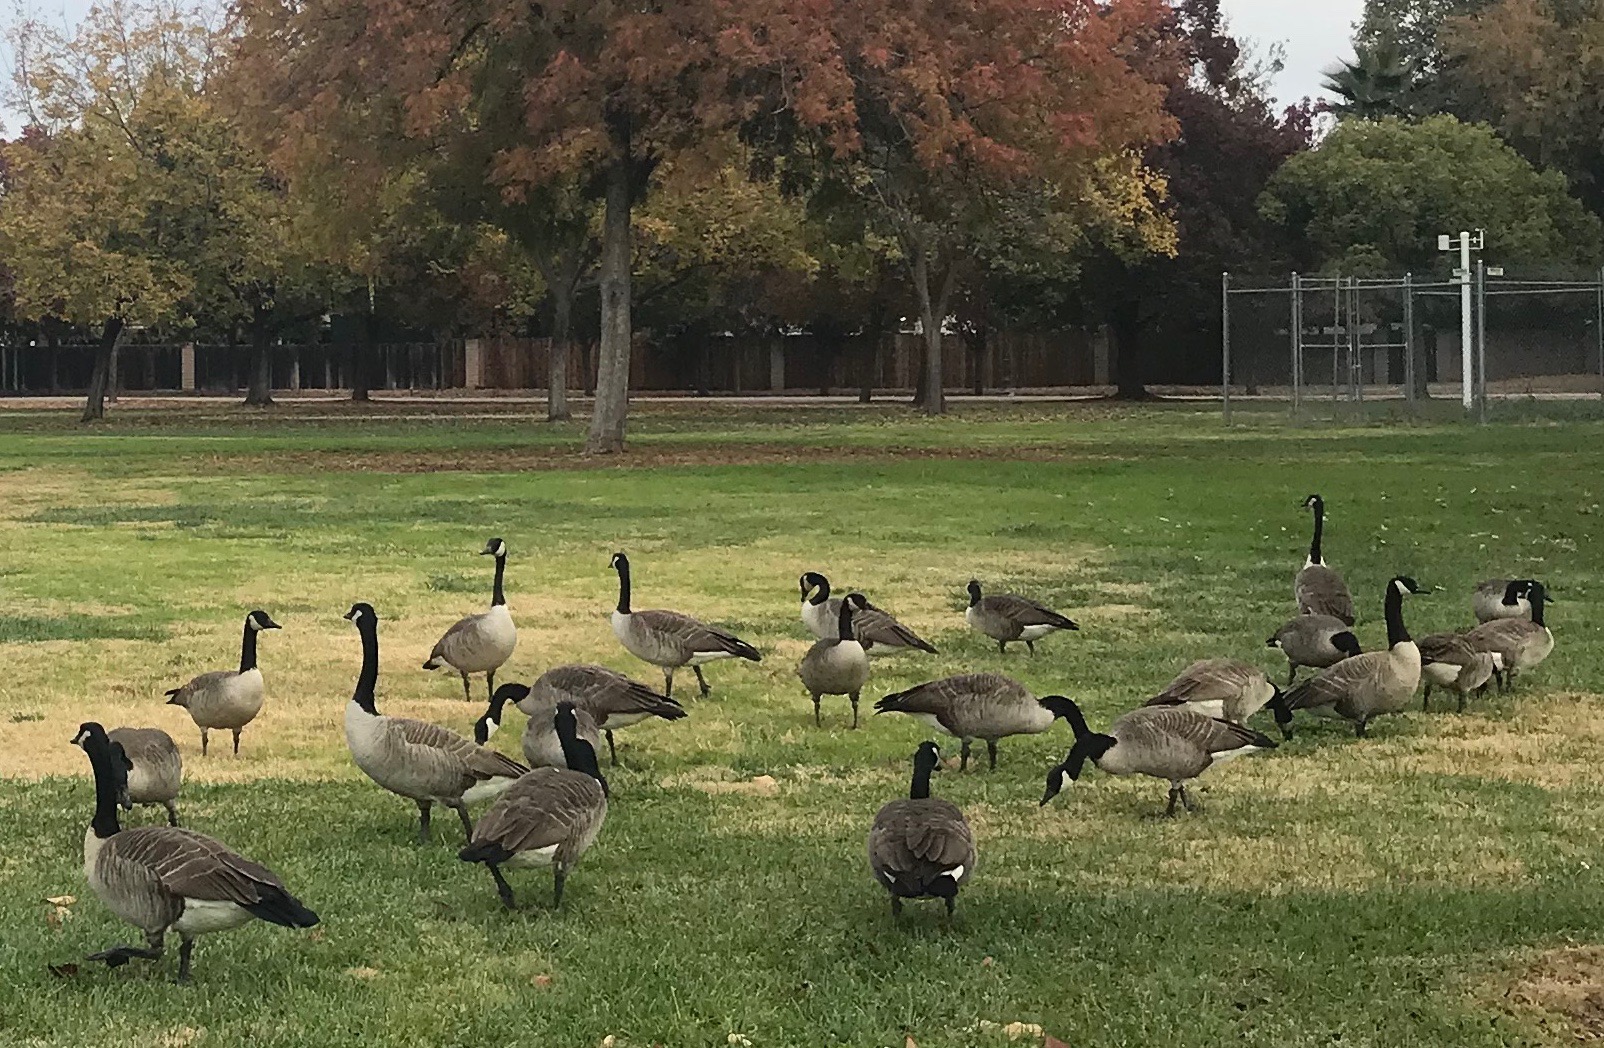 all these geese